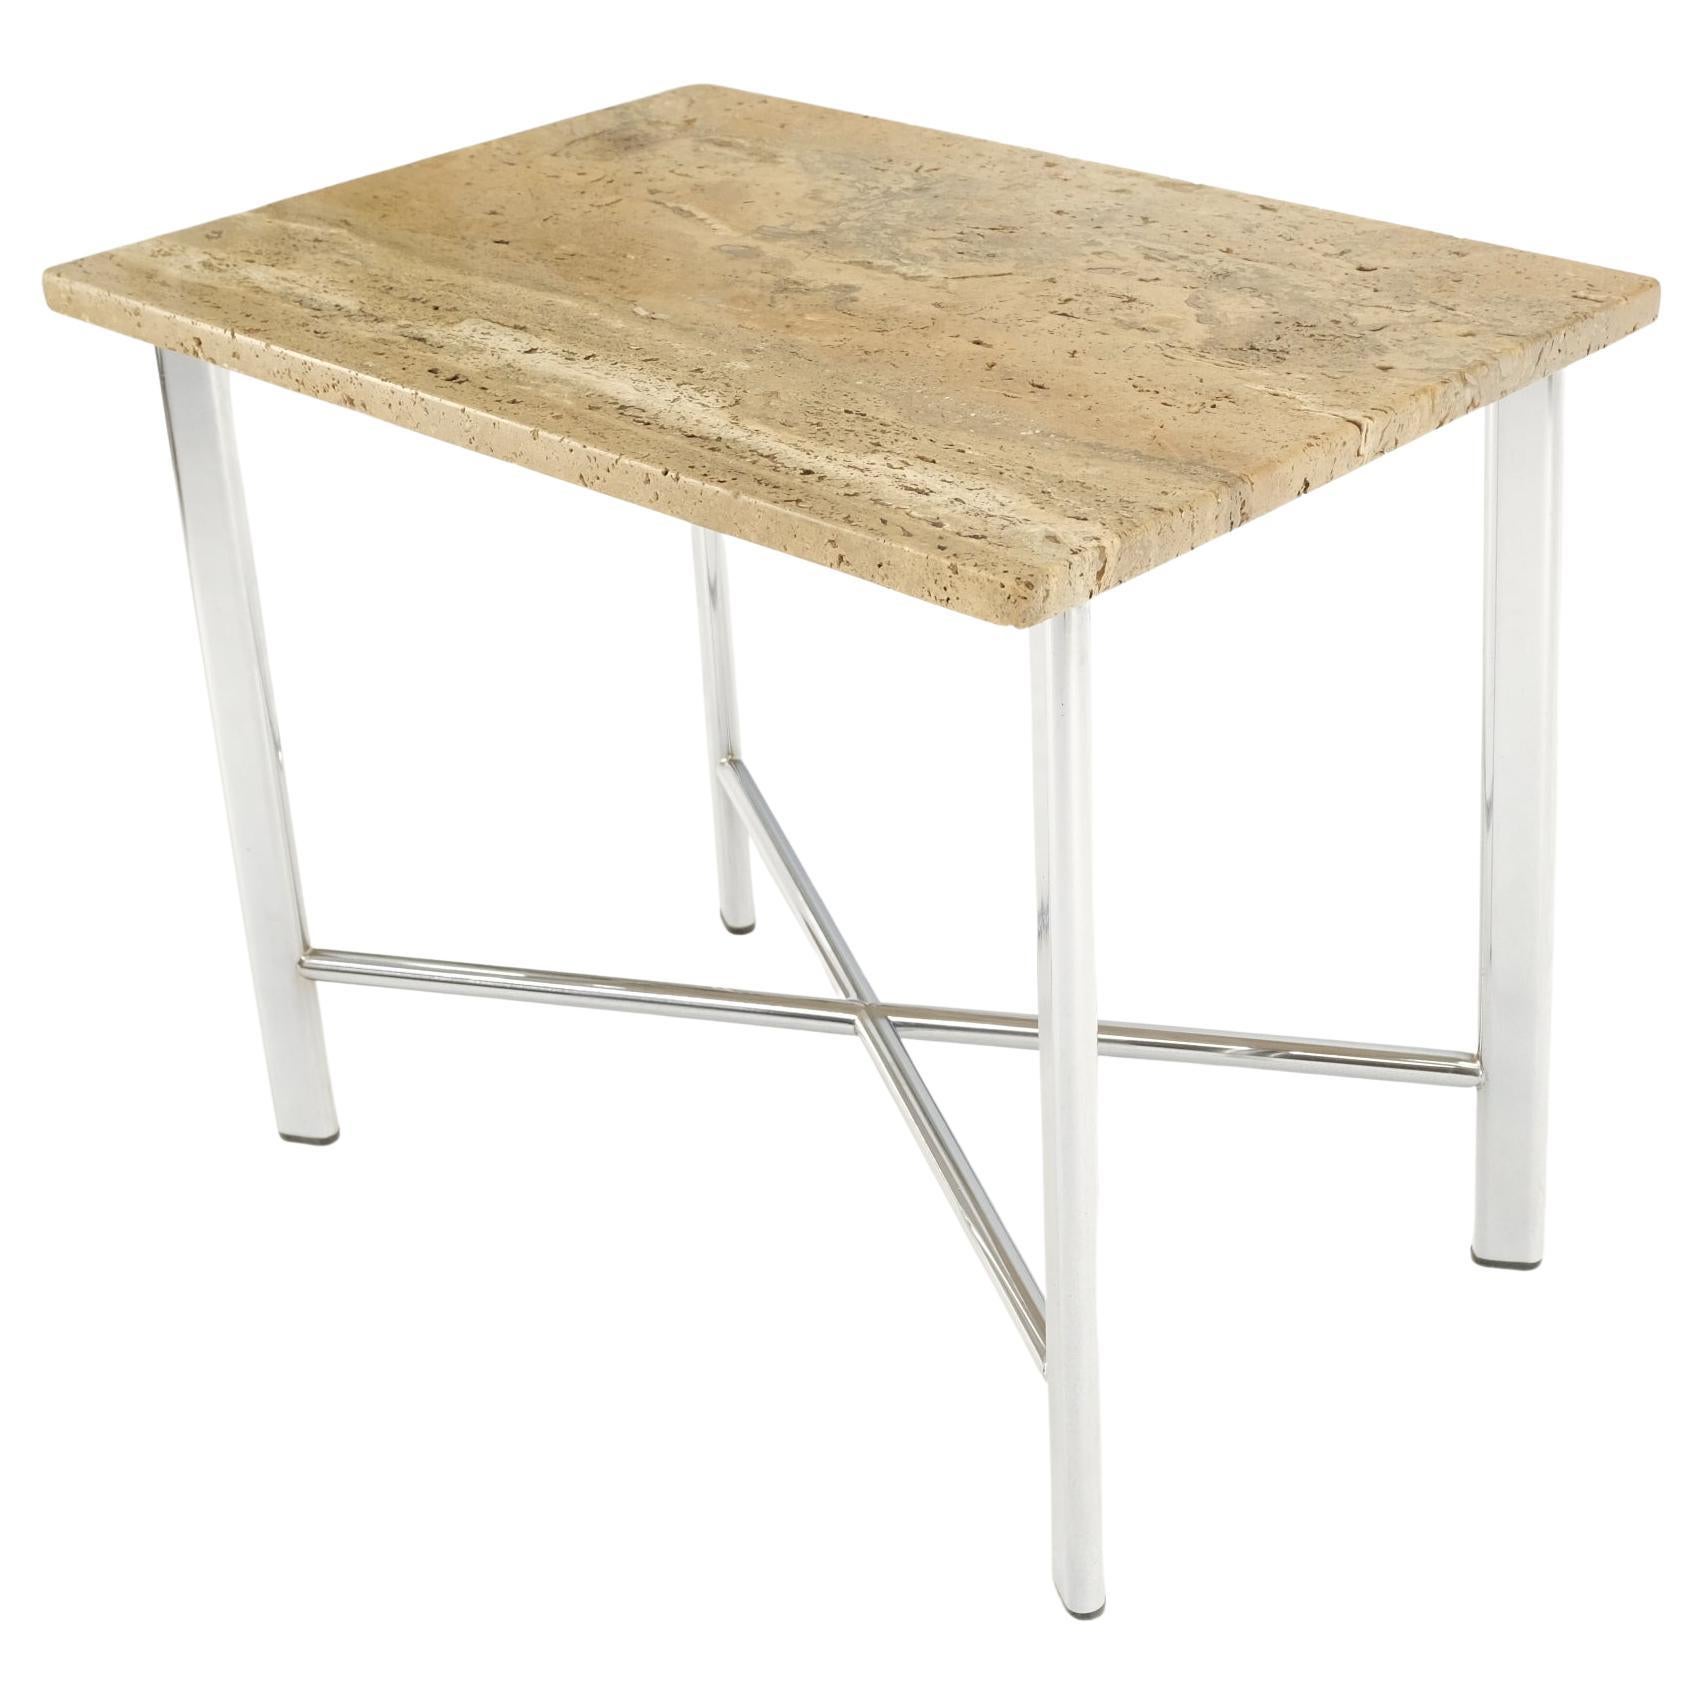 Chrome X Base Travertine Top Mid-Century Modern Rectangle Side End Table Stand